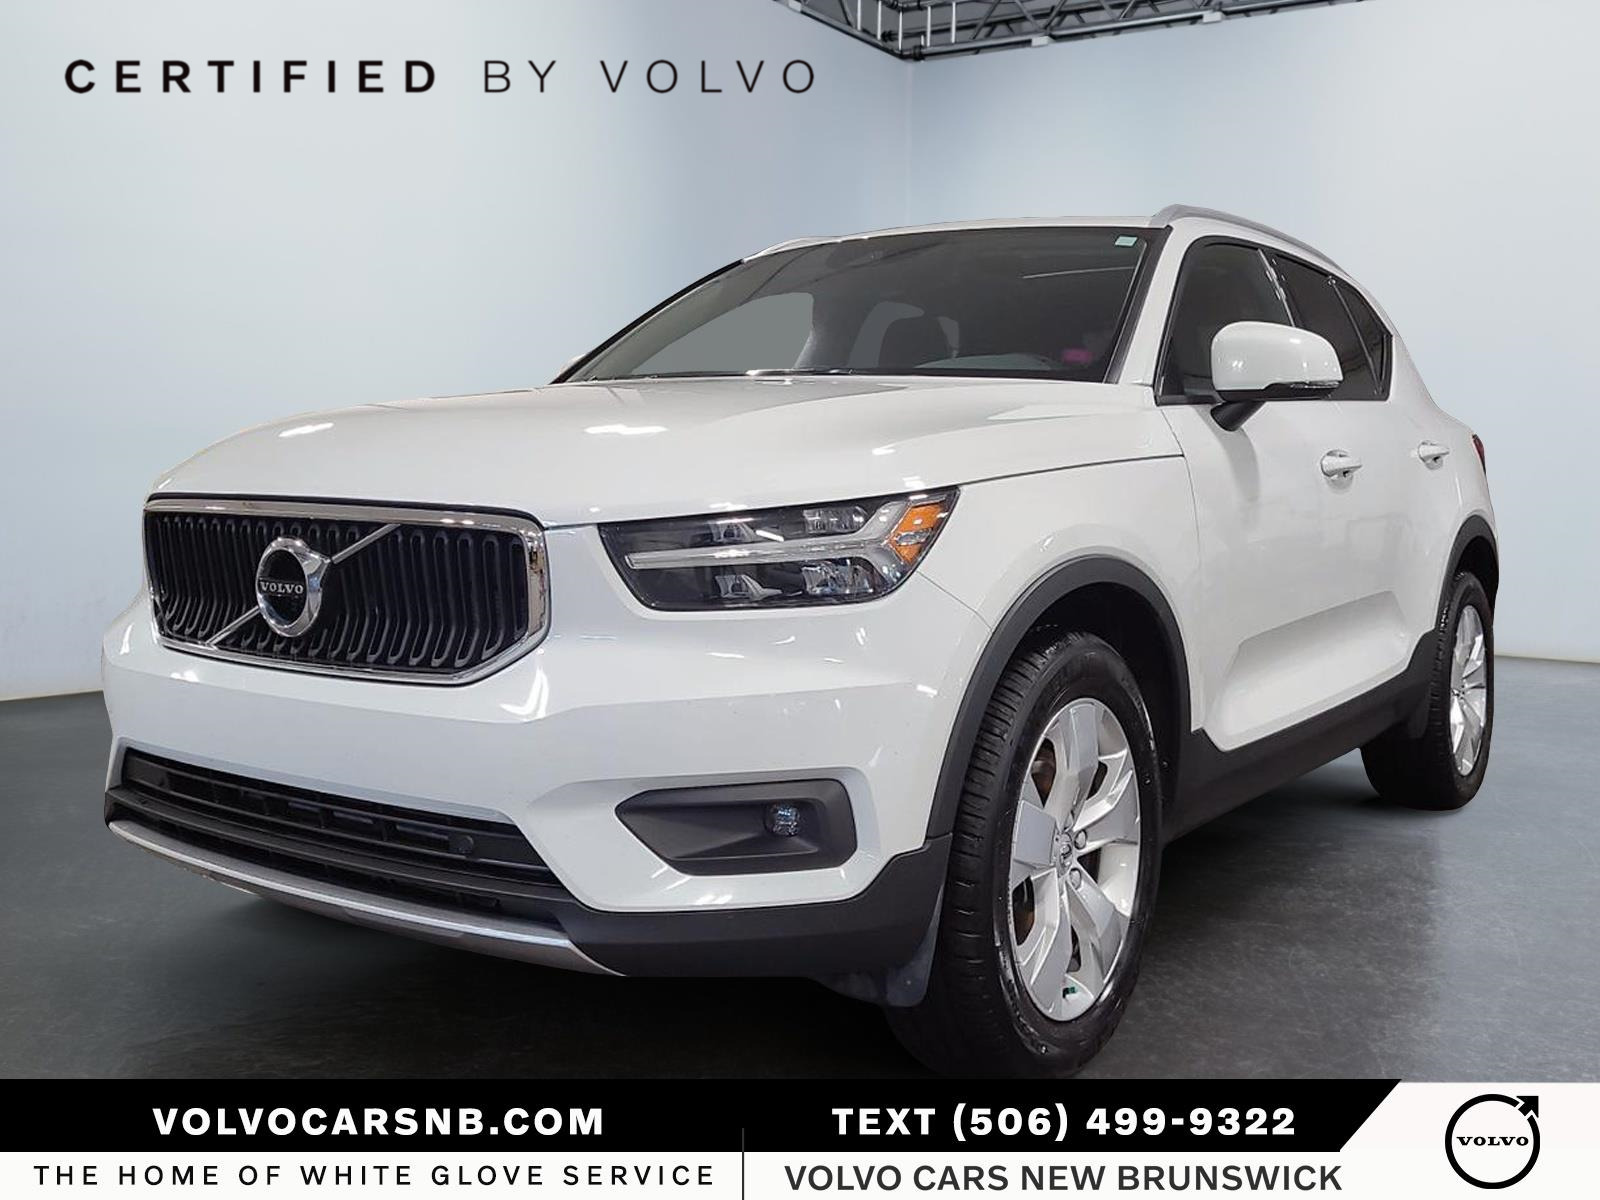 2021 Volvo XC40 Certified Pre Owned | Apple CarPlay | Remote Start